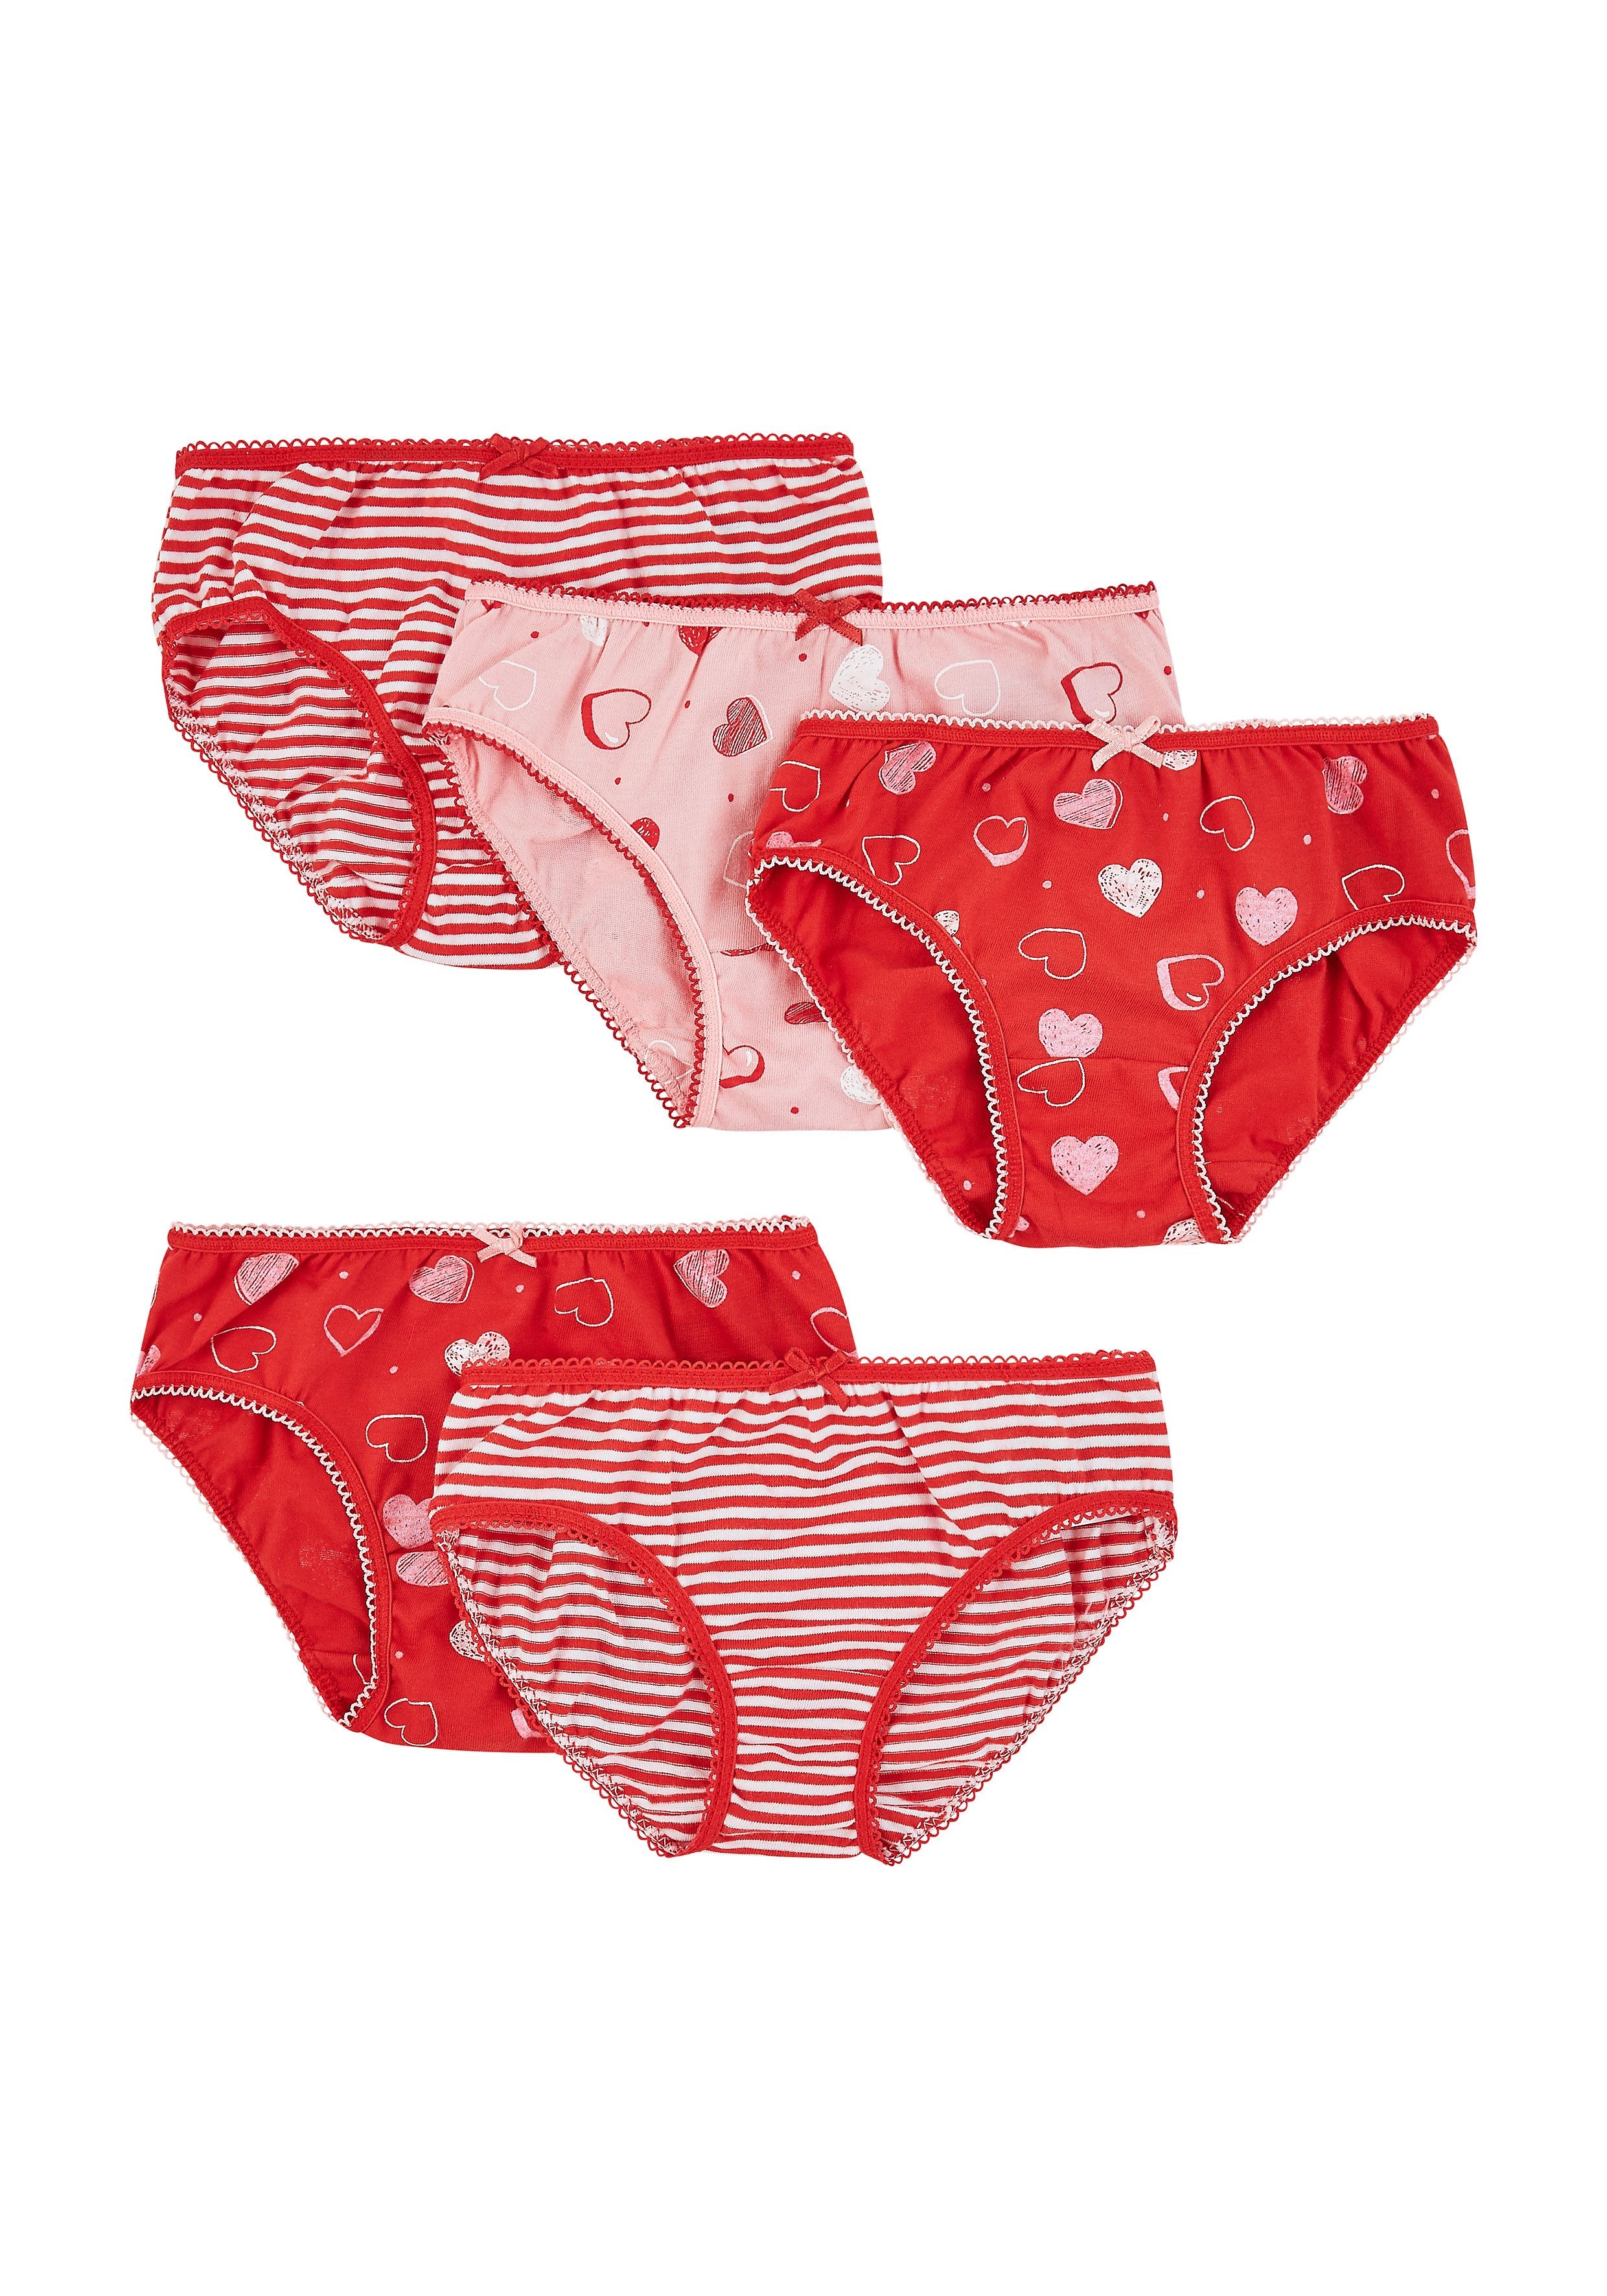 Mothercare | Girls Red Heart Briefs - 5 Pack - Red